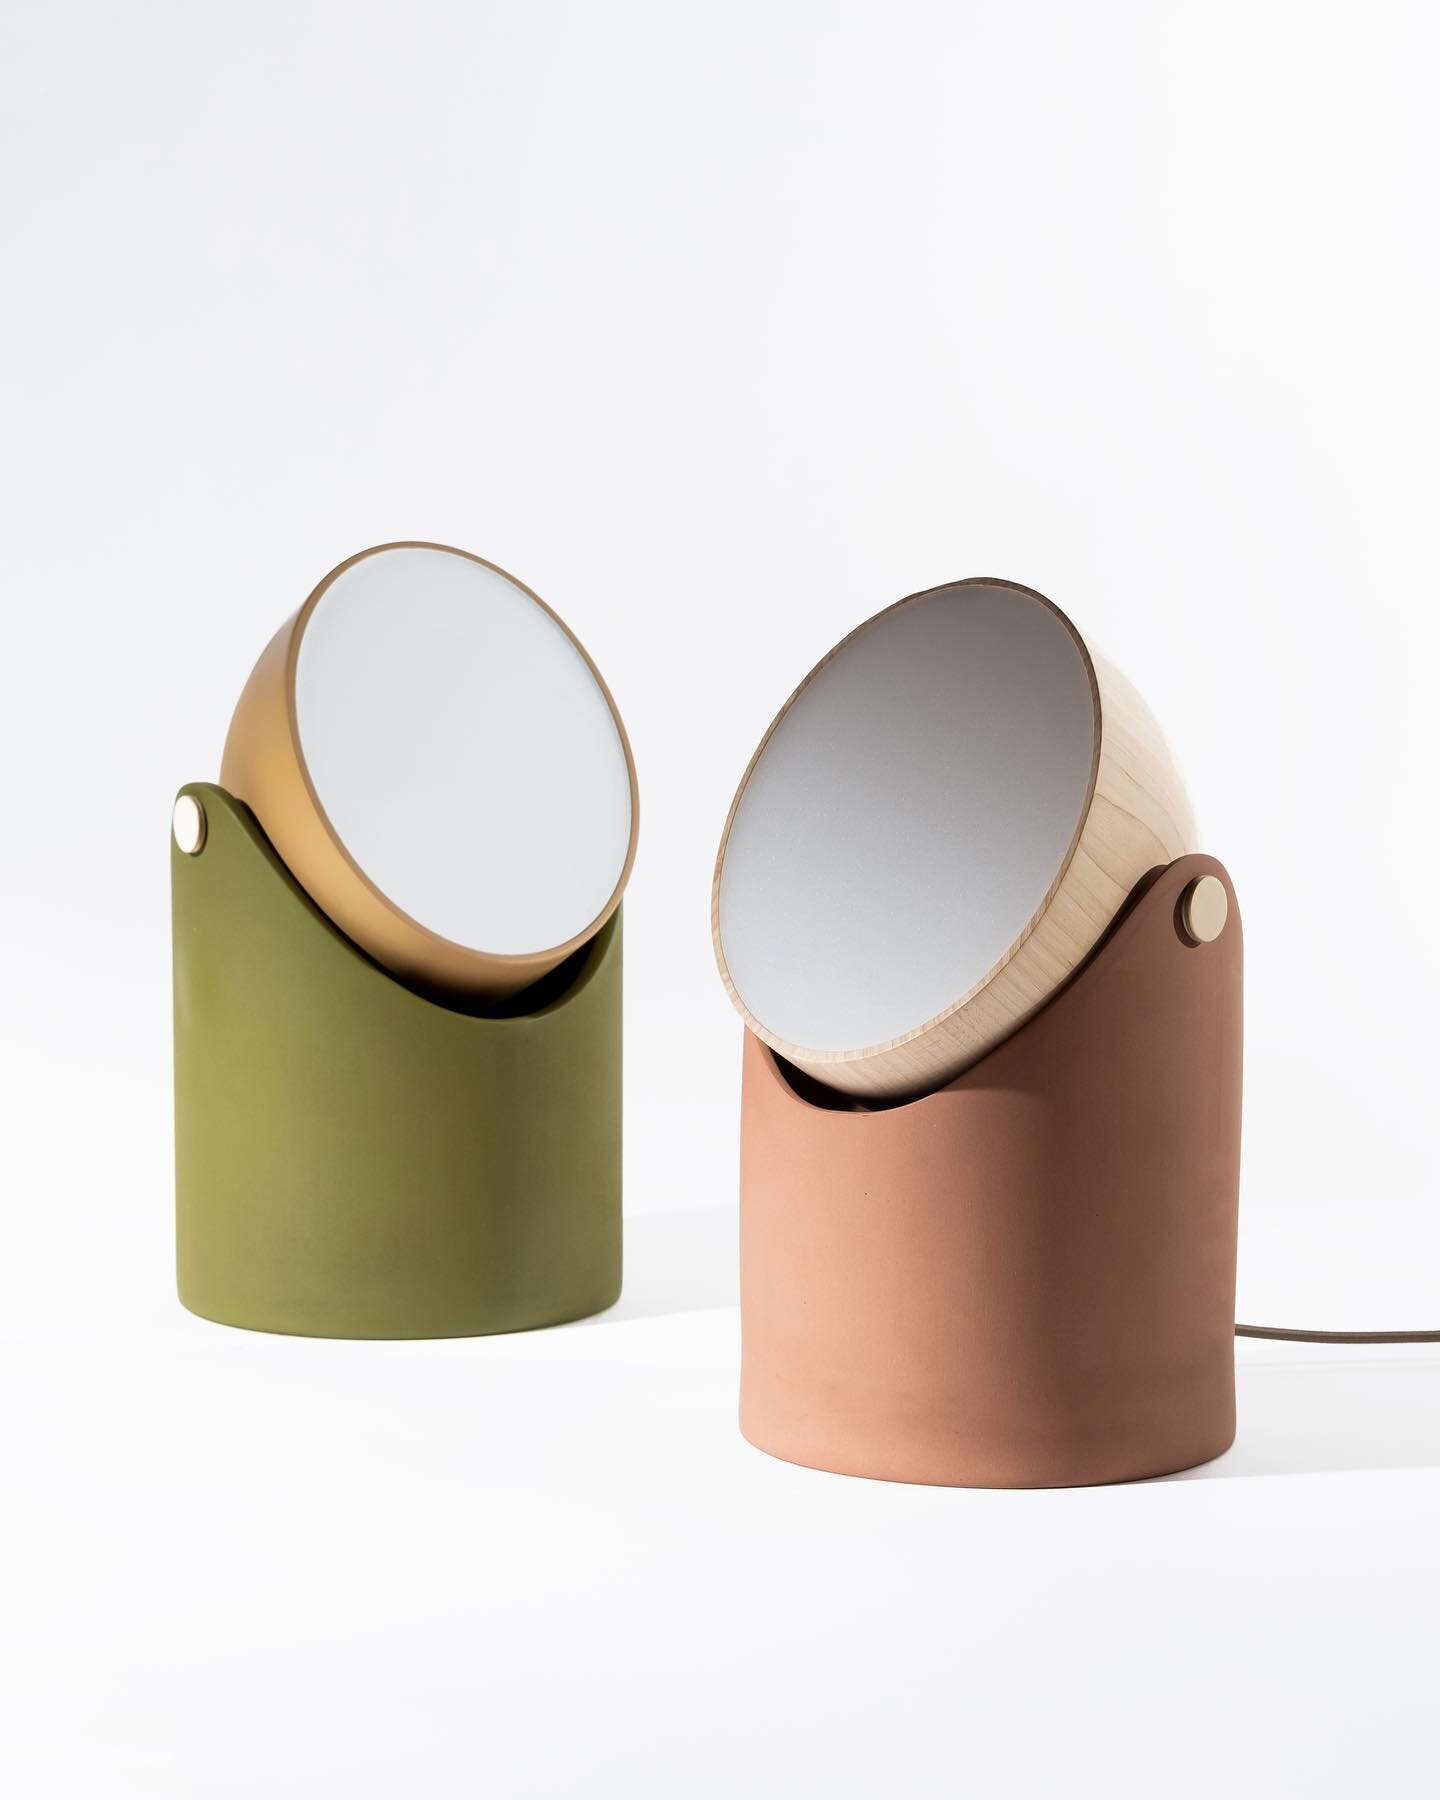 Elio, designed by Audrey Zerr @audreyzerrdesign, replicates the light that is occurring outside at a specific time of day. This will help regulate user&rsquo;s circadian rhythms that are often obscured by light sources such as computers and phones. 
